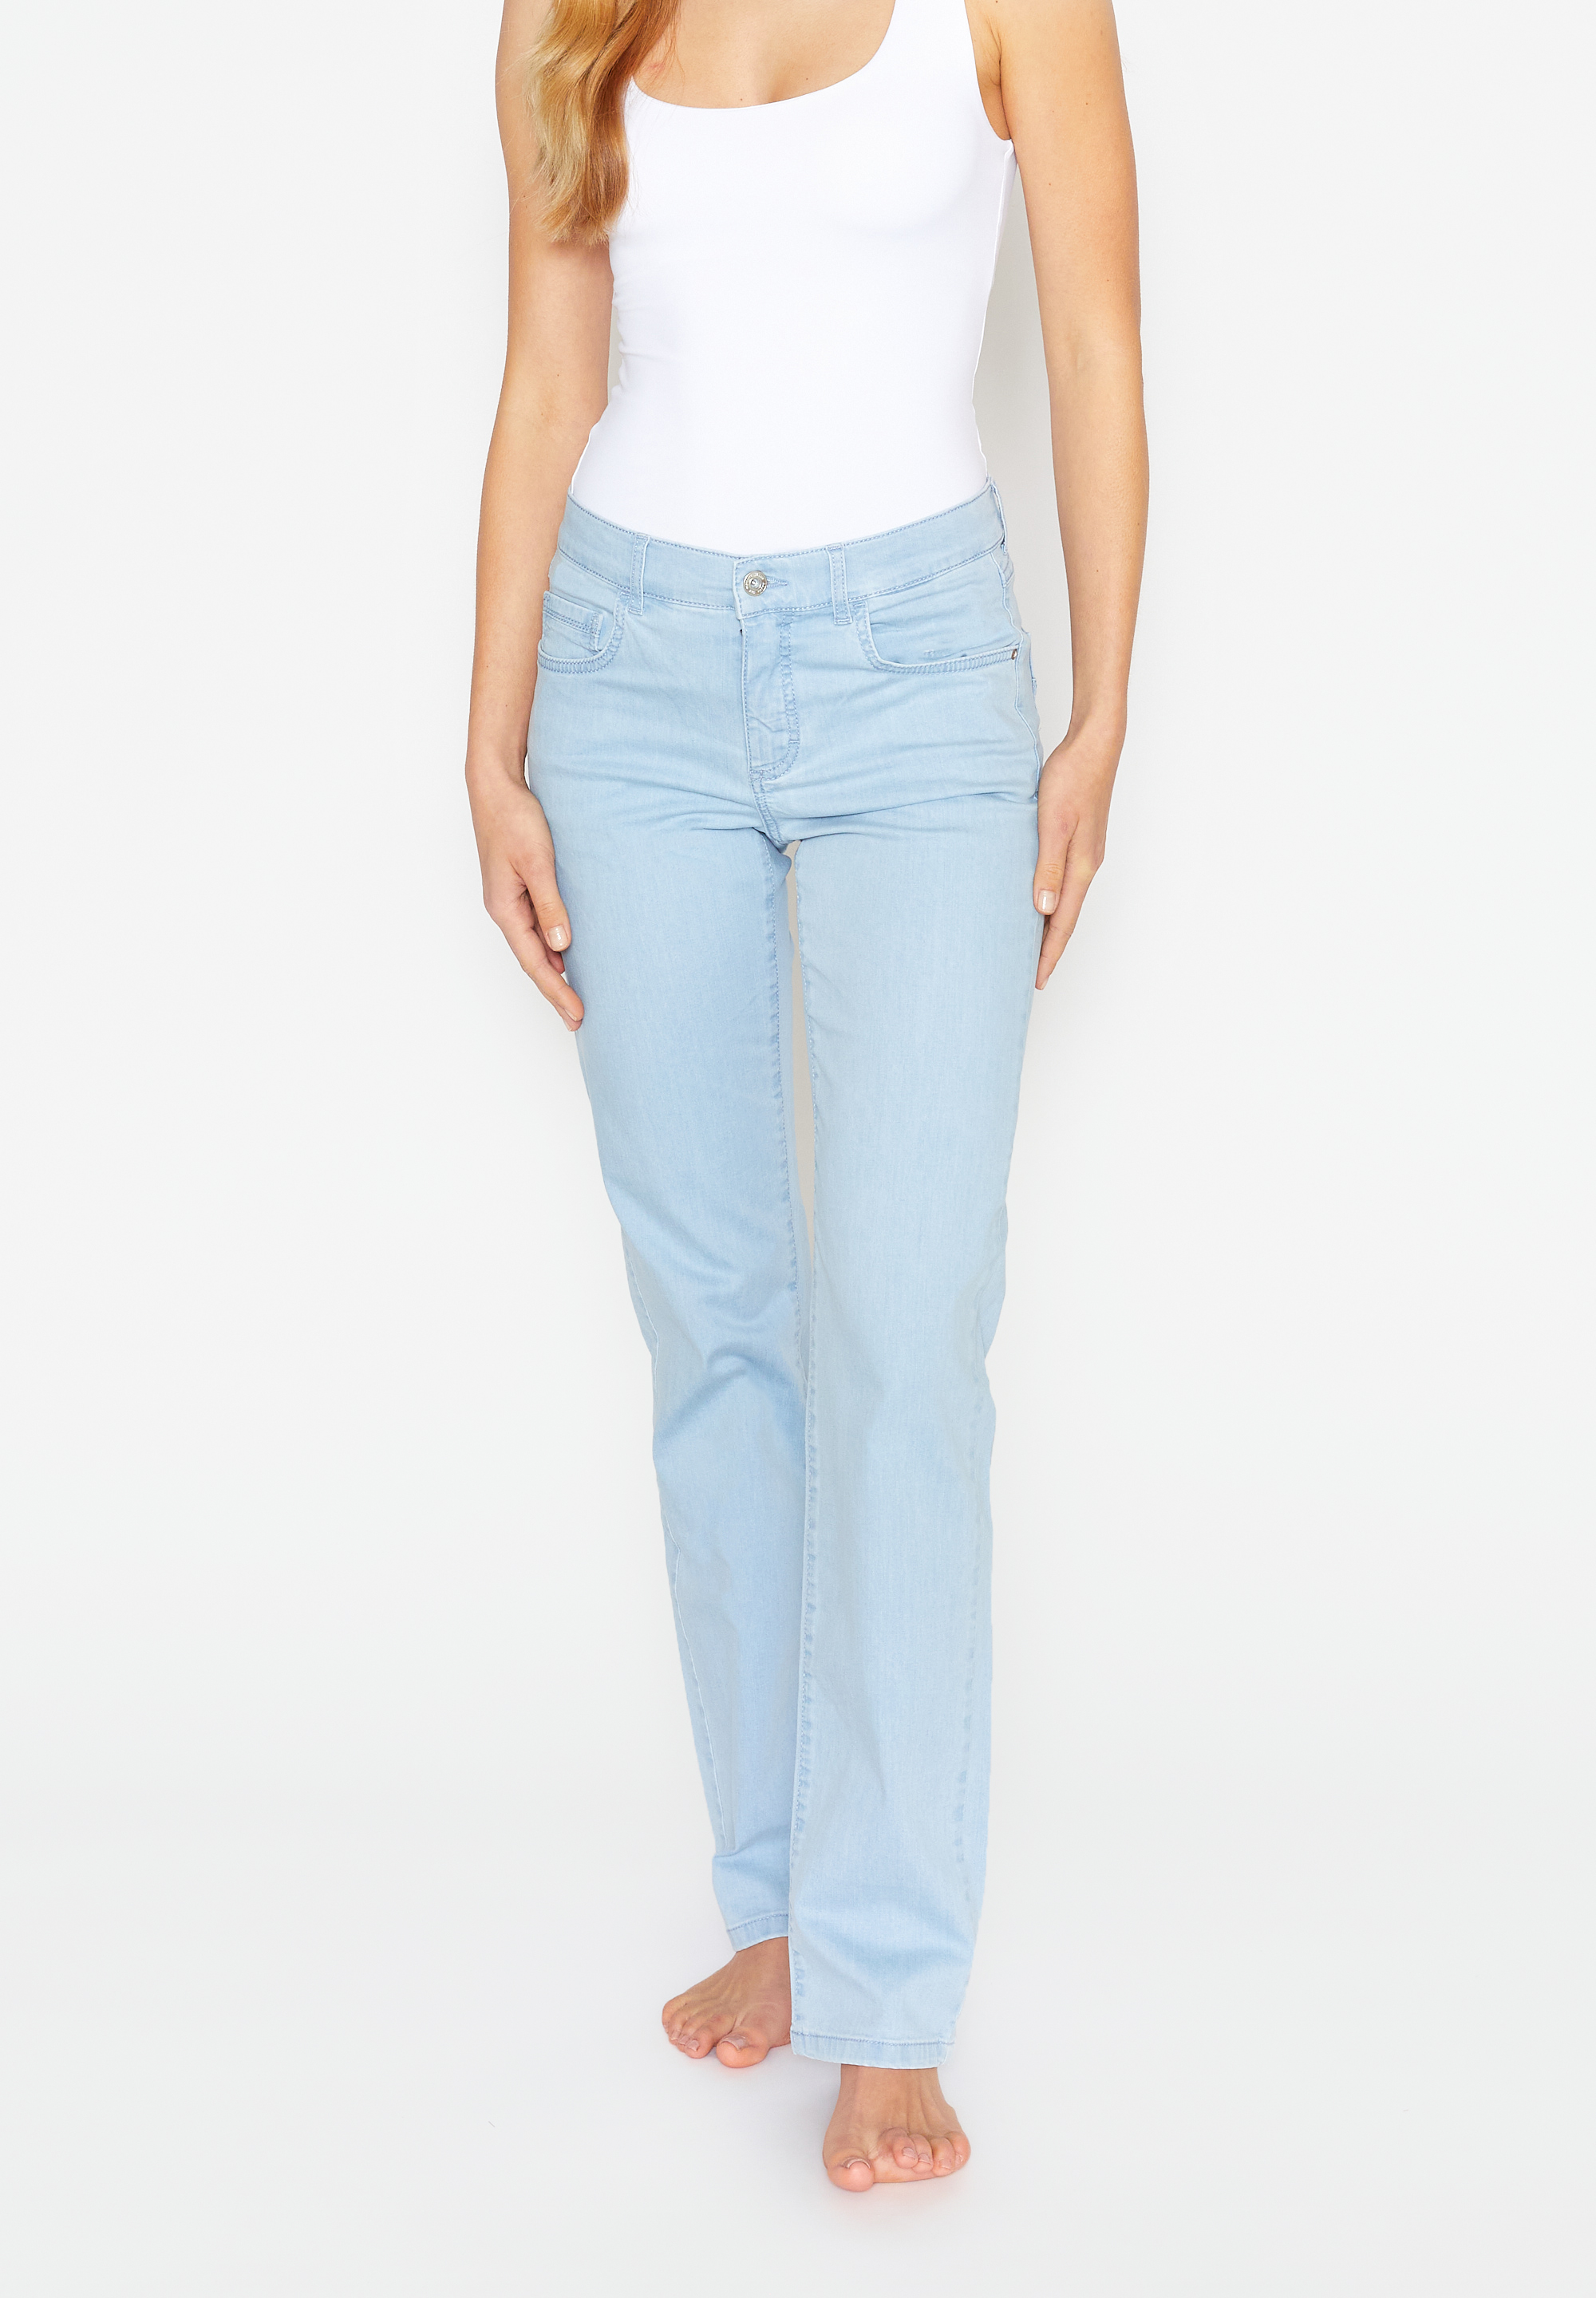 ANGELS JEANS DOLLY 332 STRETCH - | Jeans 8000.35 Dolly | bleached | | Angels Angels Jeans-Manufaktur Jeans blue DENIM Damen 